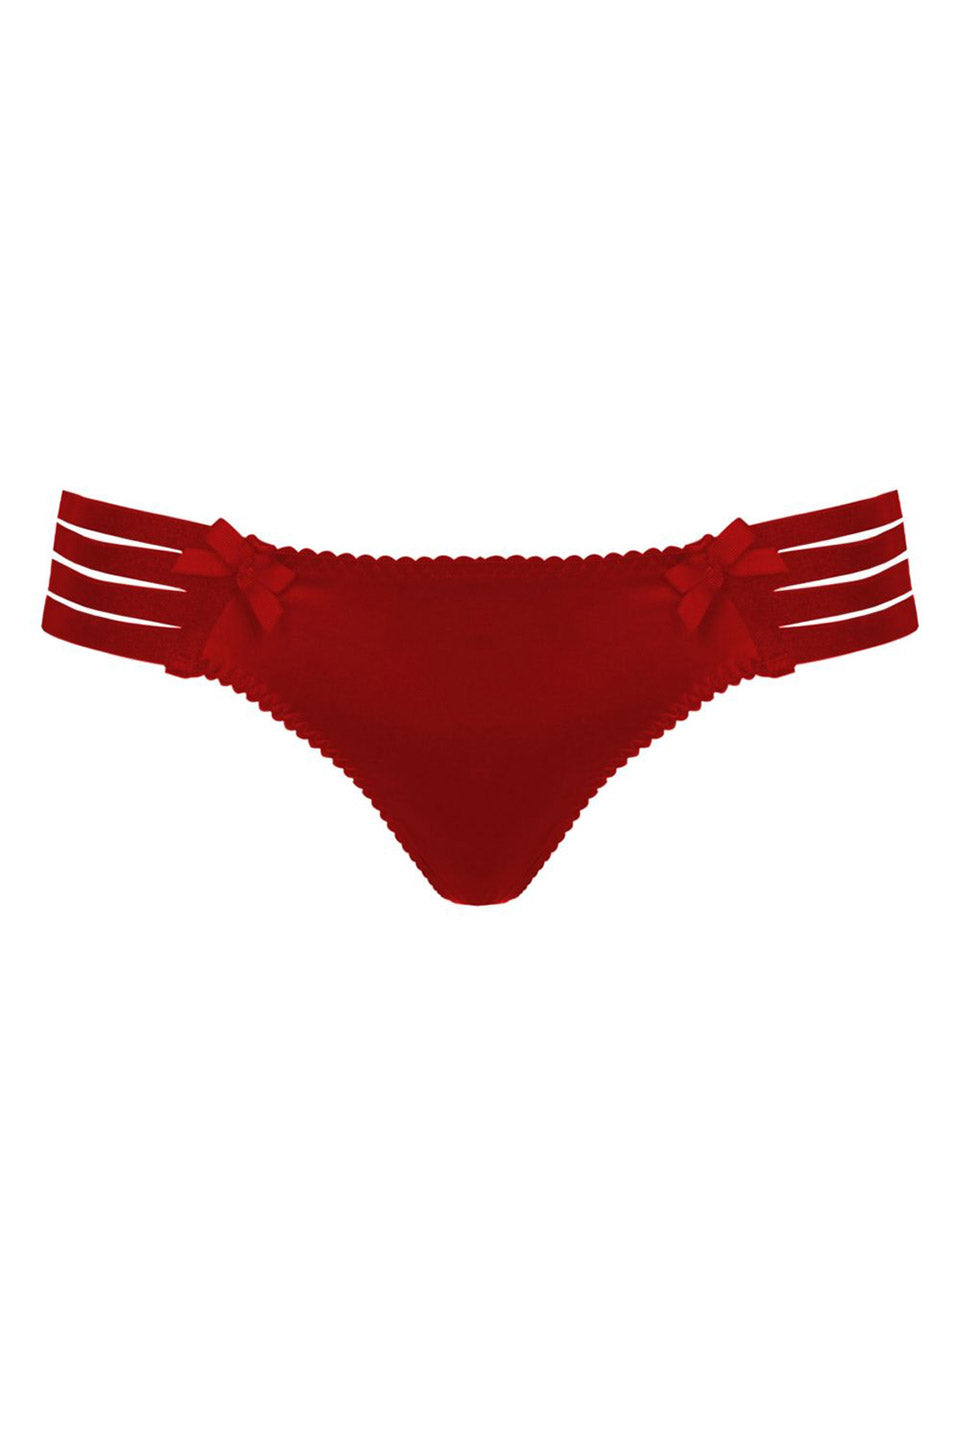 Thumbnail for Product gallery 1, Atelier bordelle webbed thong red front